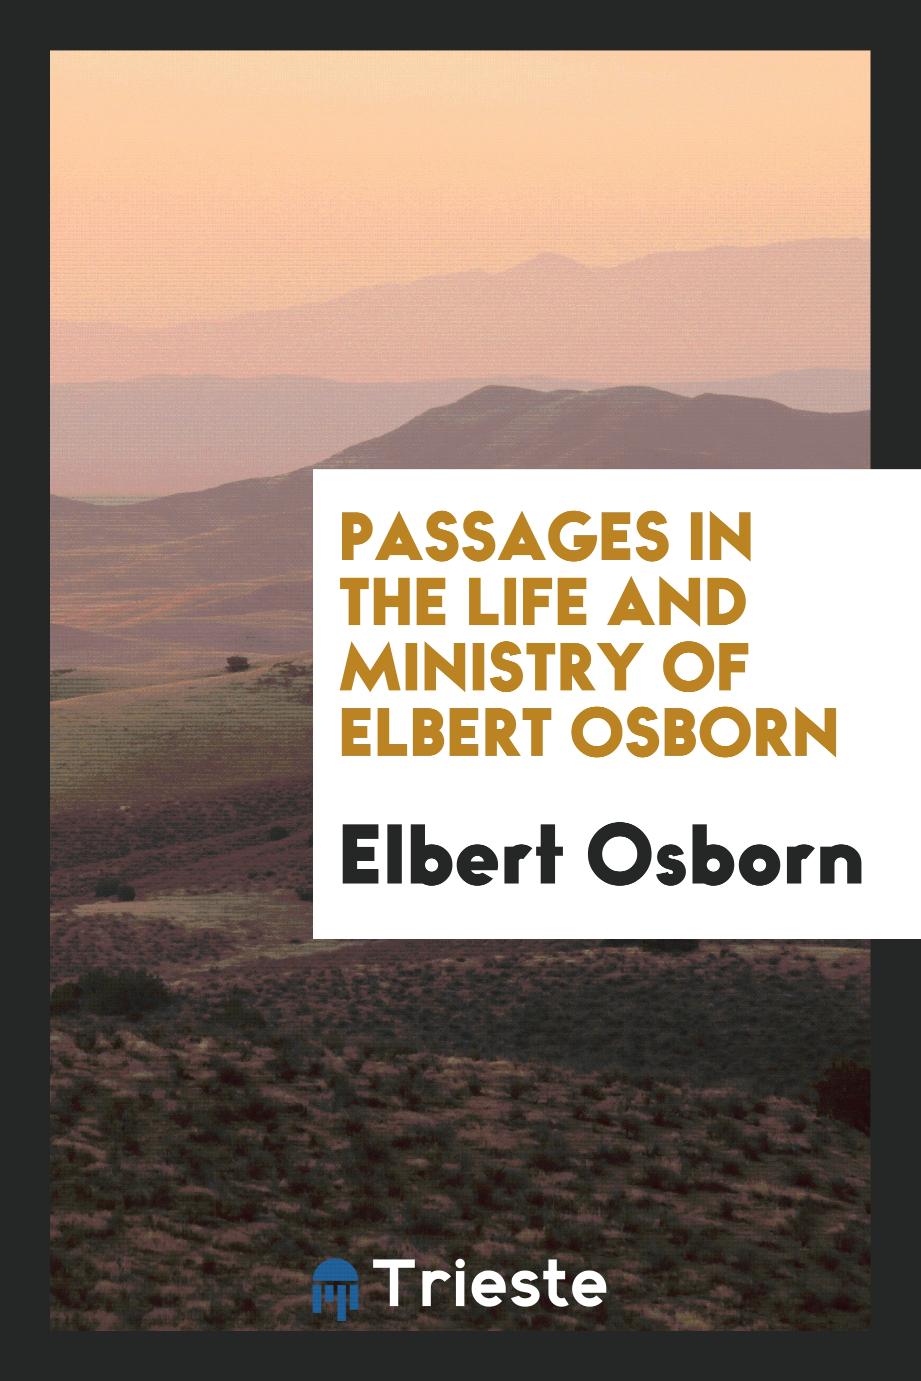 Passages in the Life and Ministry of Elbert Osborn